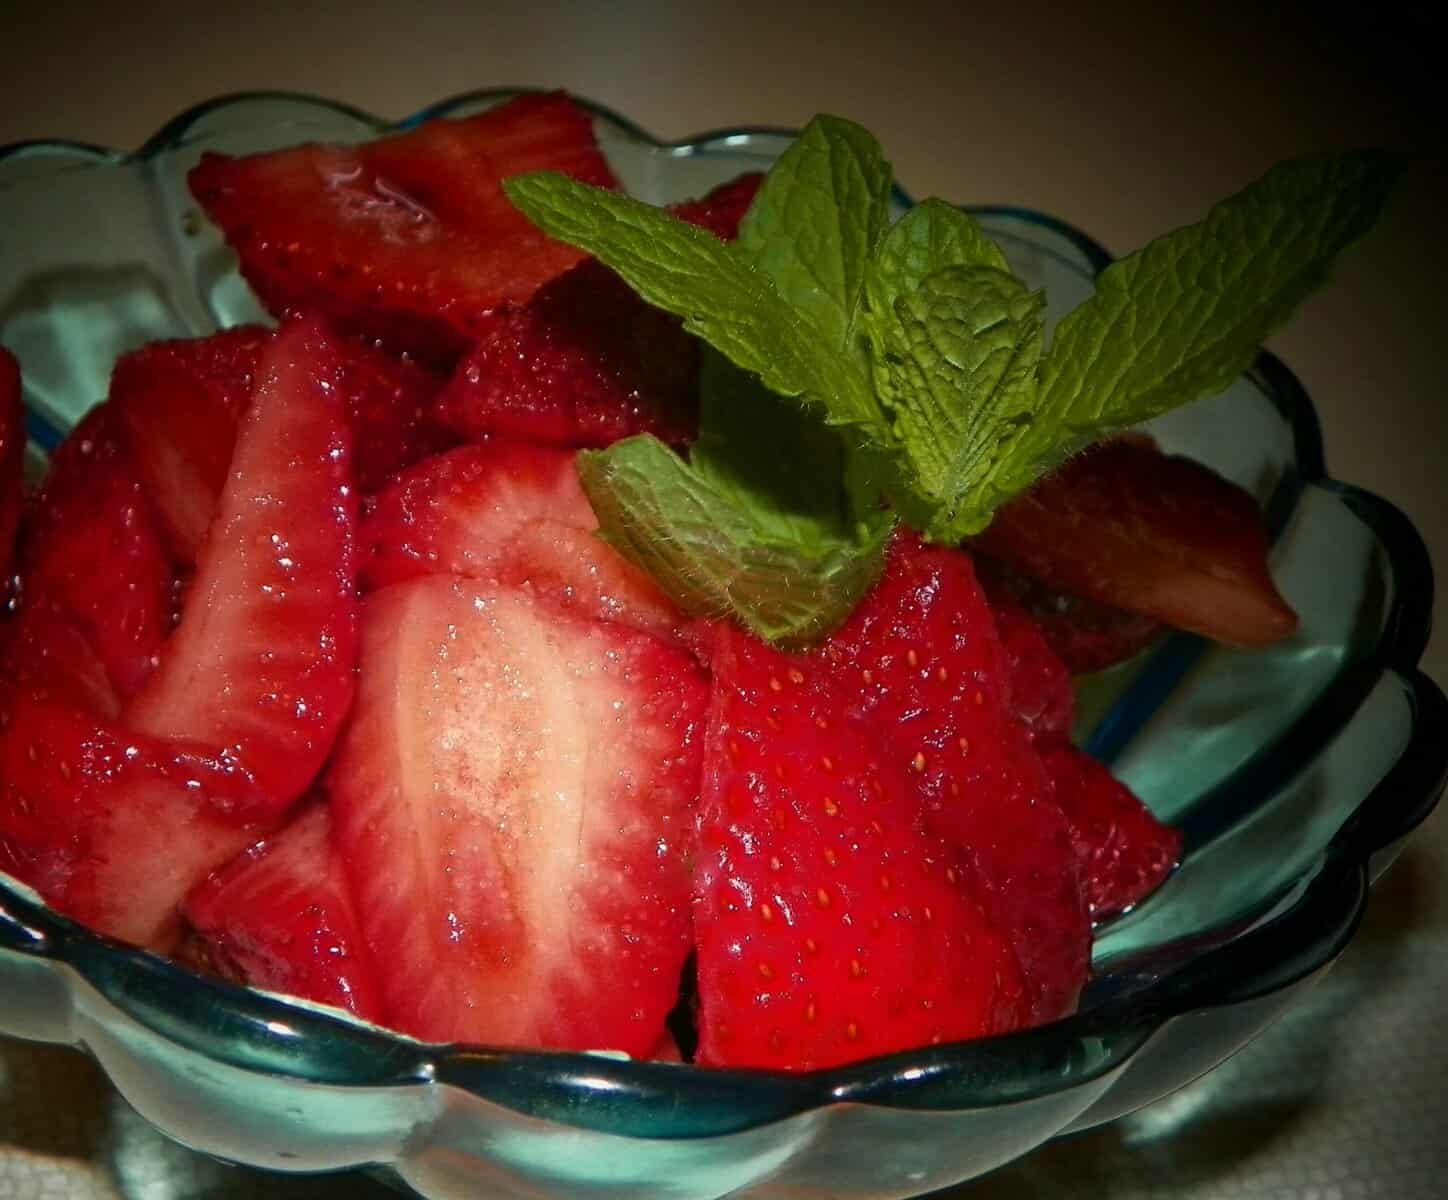  Sweet meets tangy in this delightful strawberry dish!